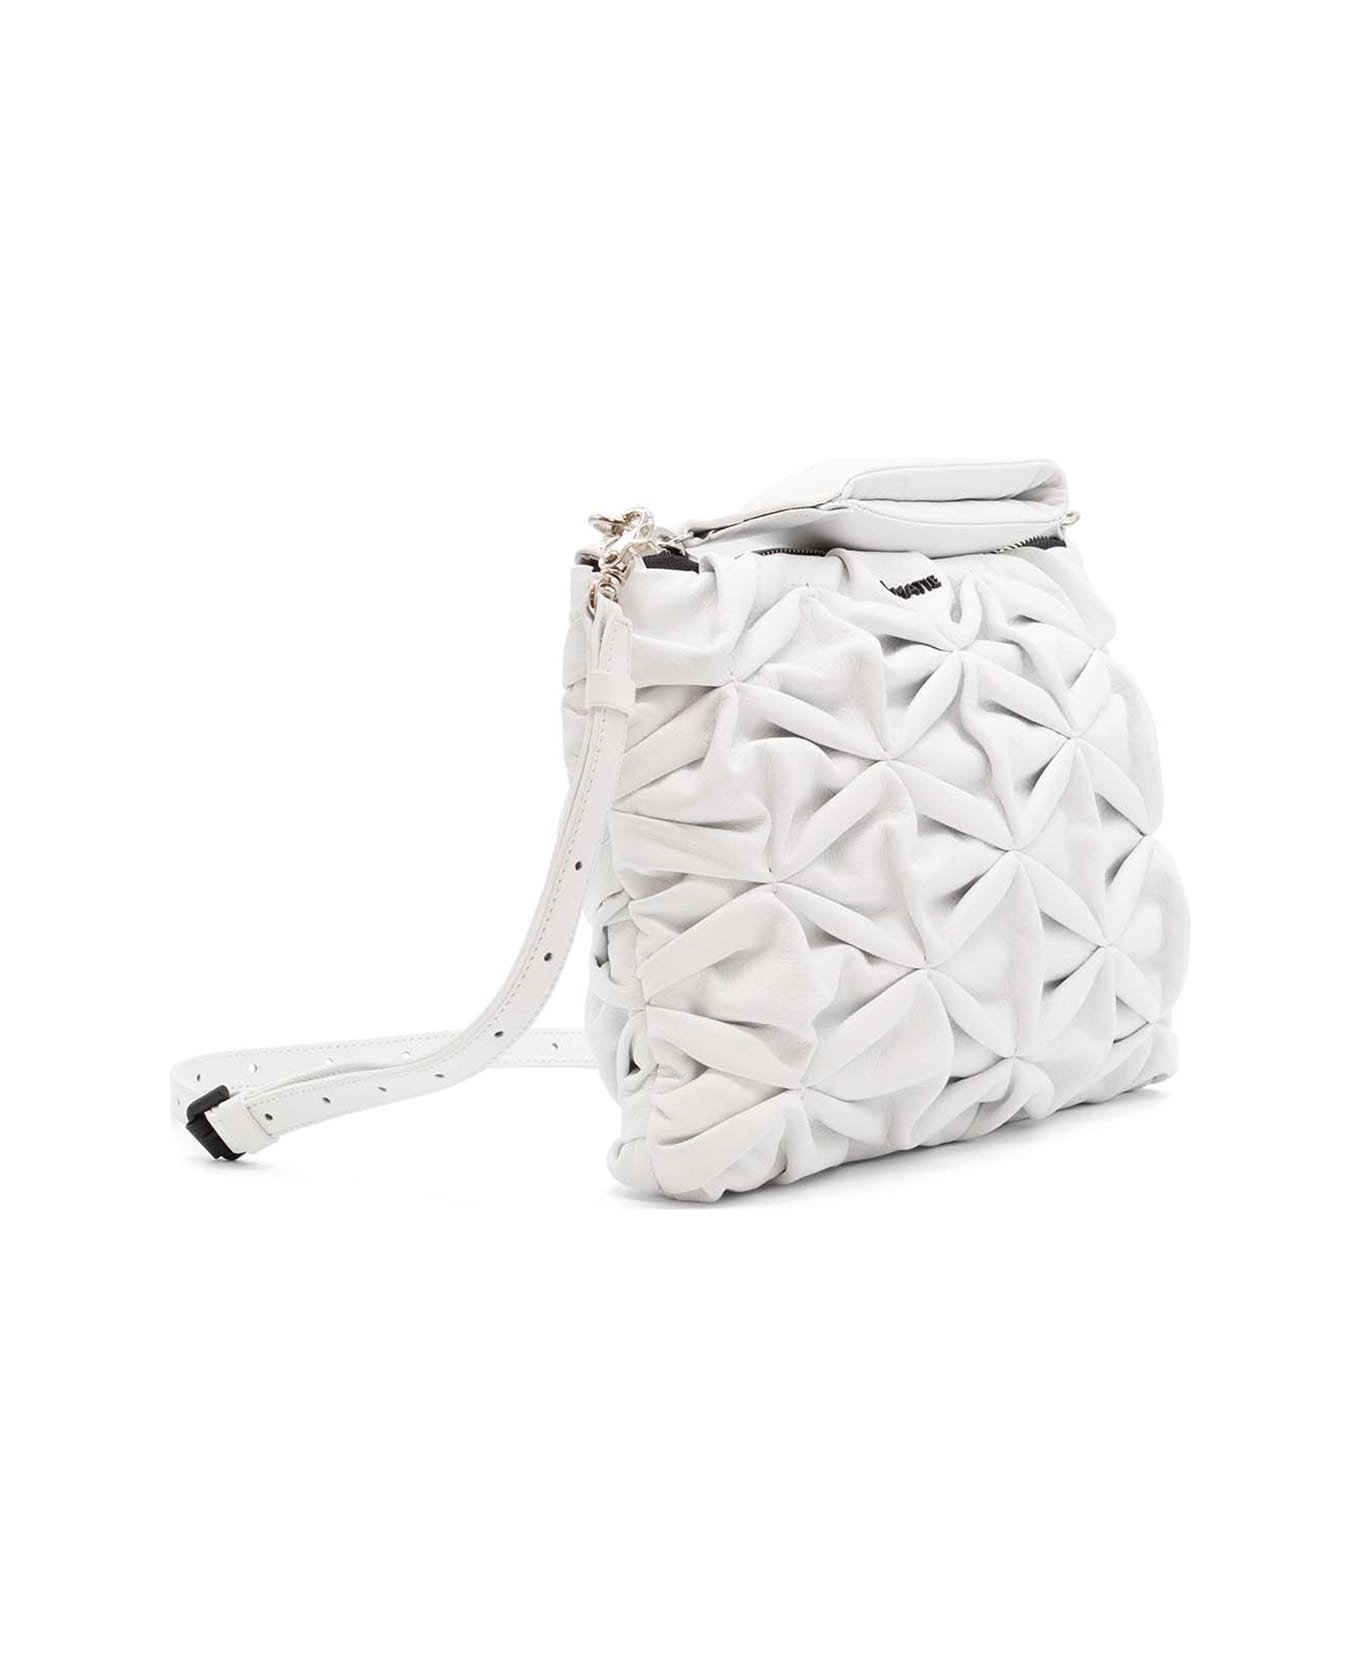 Vic Matié White Leather Bag With Shoulder Strap - WHITE